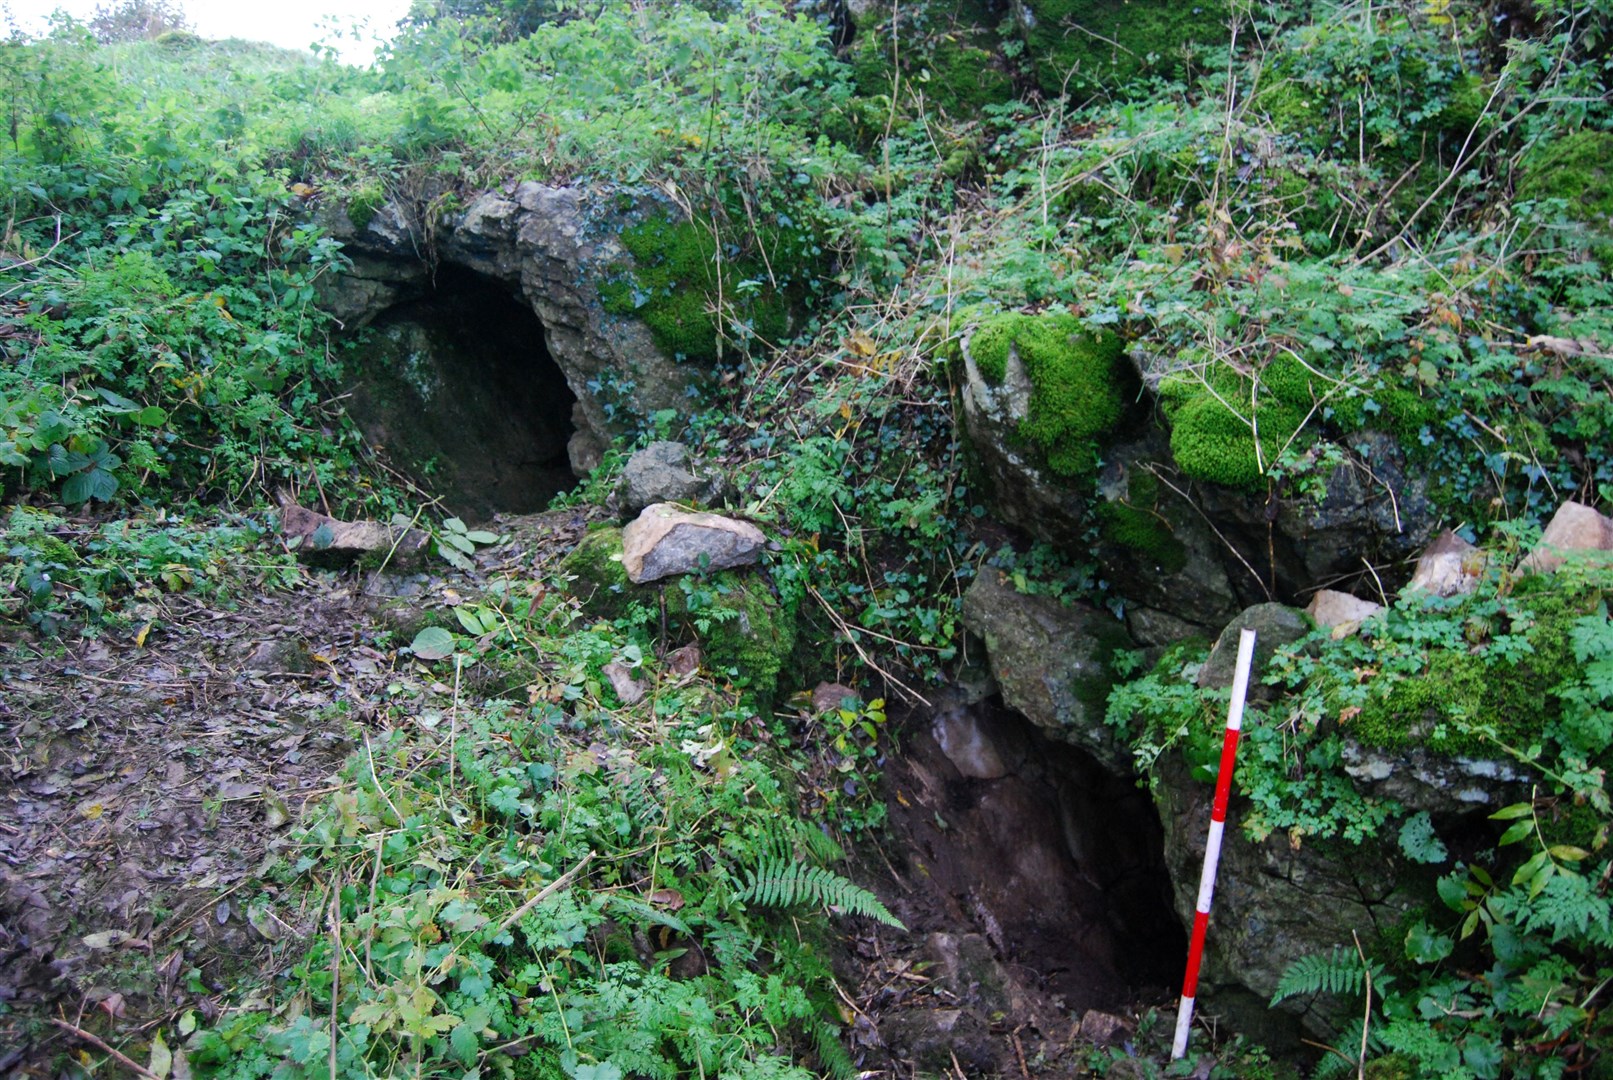 Killuragh Cave in County Limerick, Ireland (Sam Moore and Marion Dowd/Molecular Biology and Evolution)